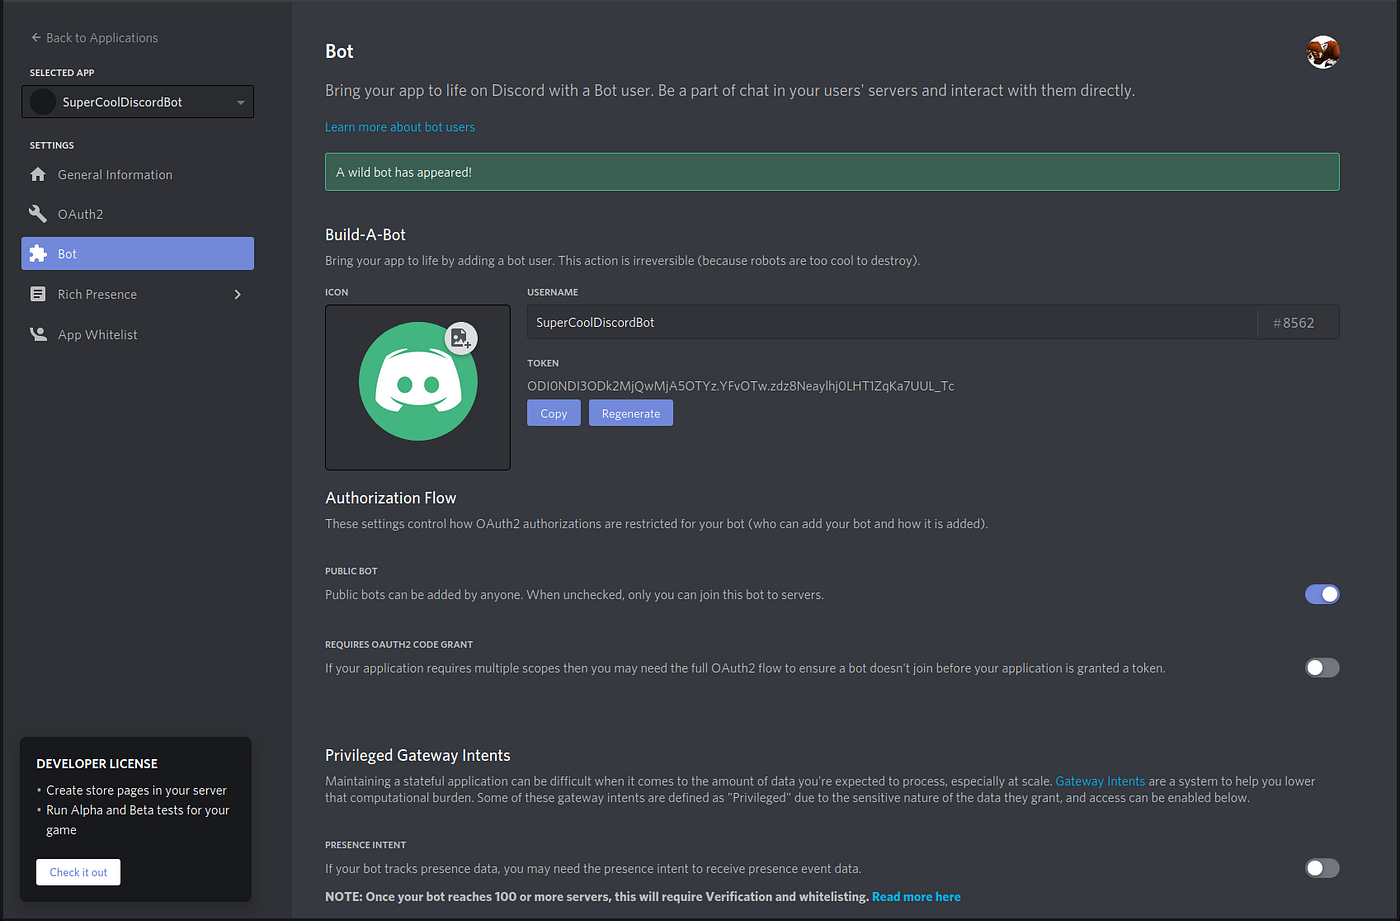 Is Discord ready for the next big step?, by ARTInvest